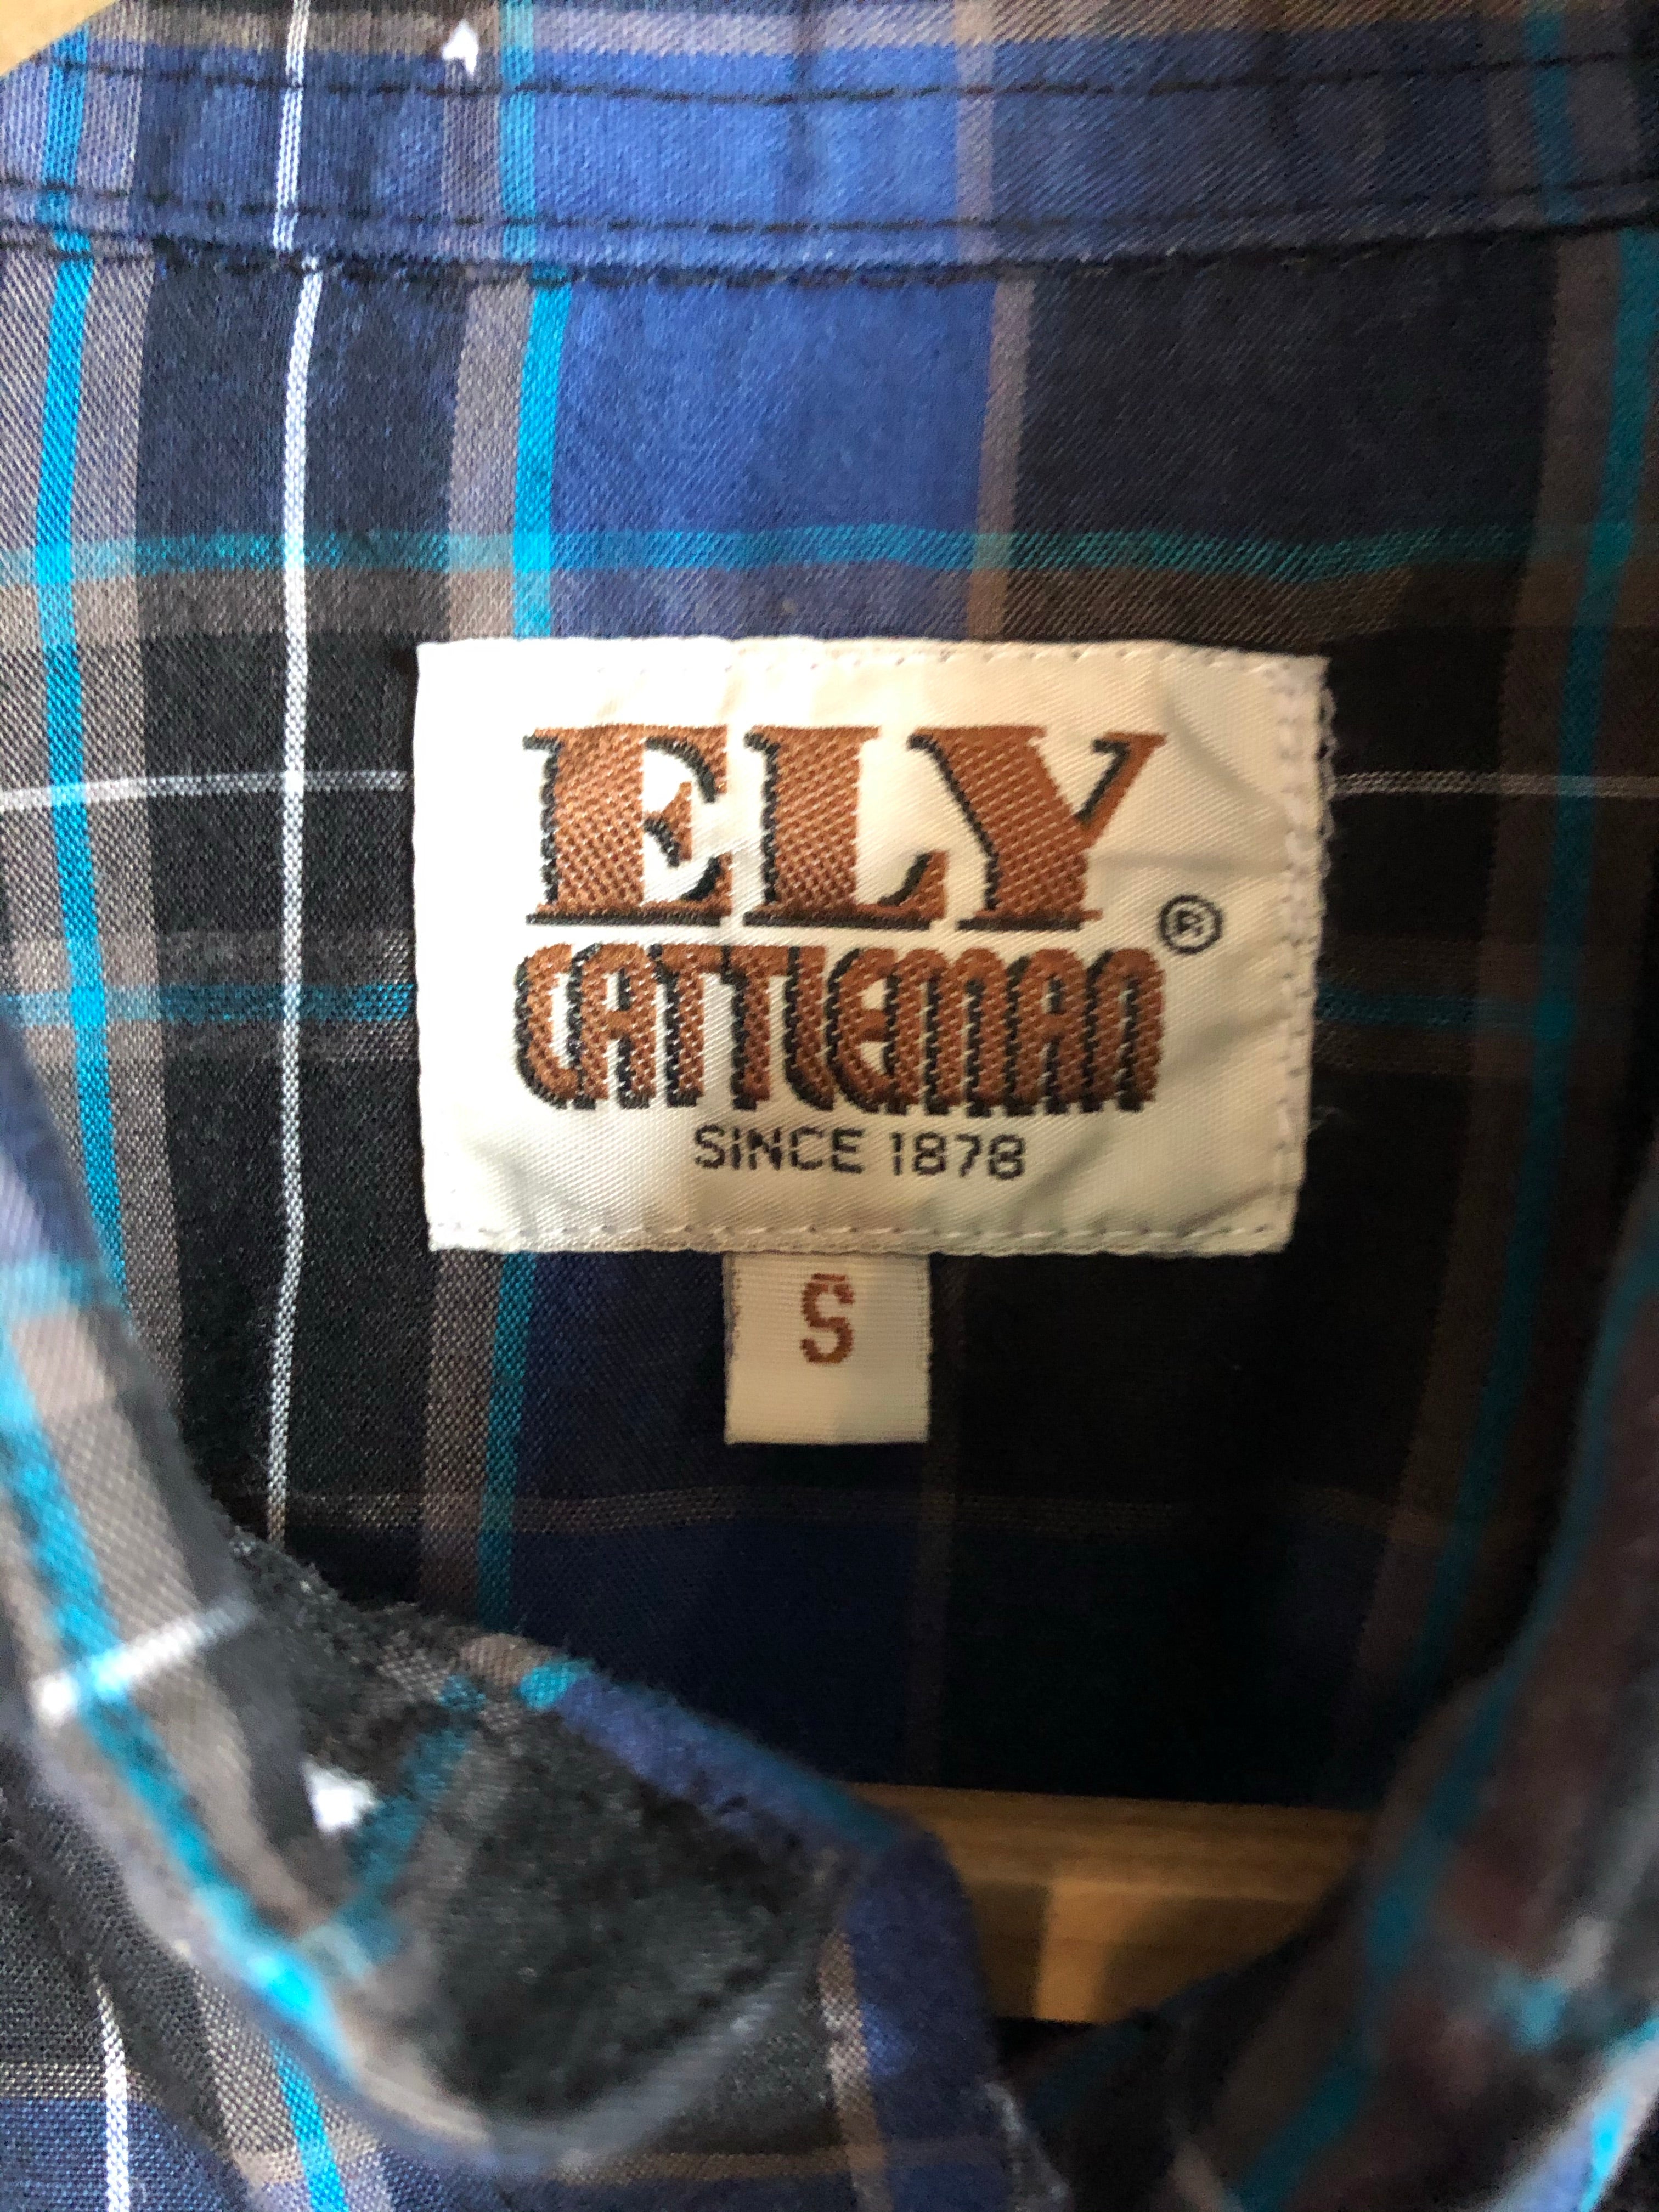 Vintage Ely Cattleman Western Pearl Snap Shirt – The Bowery Vault